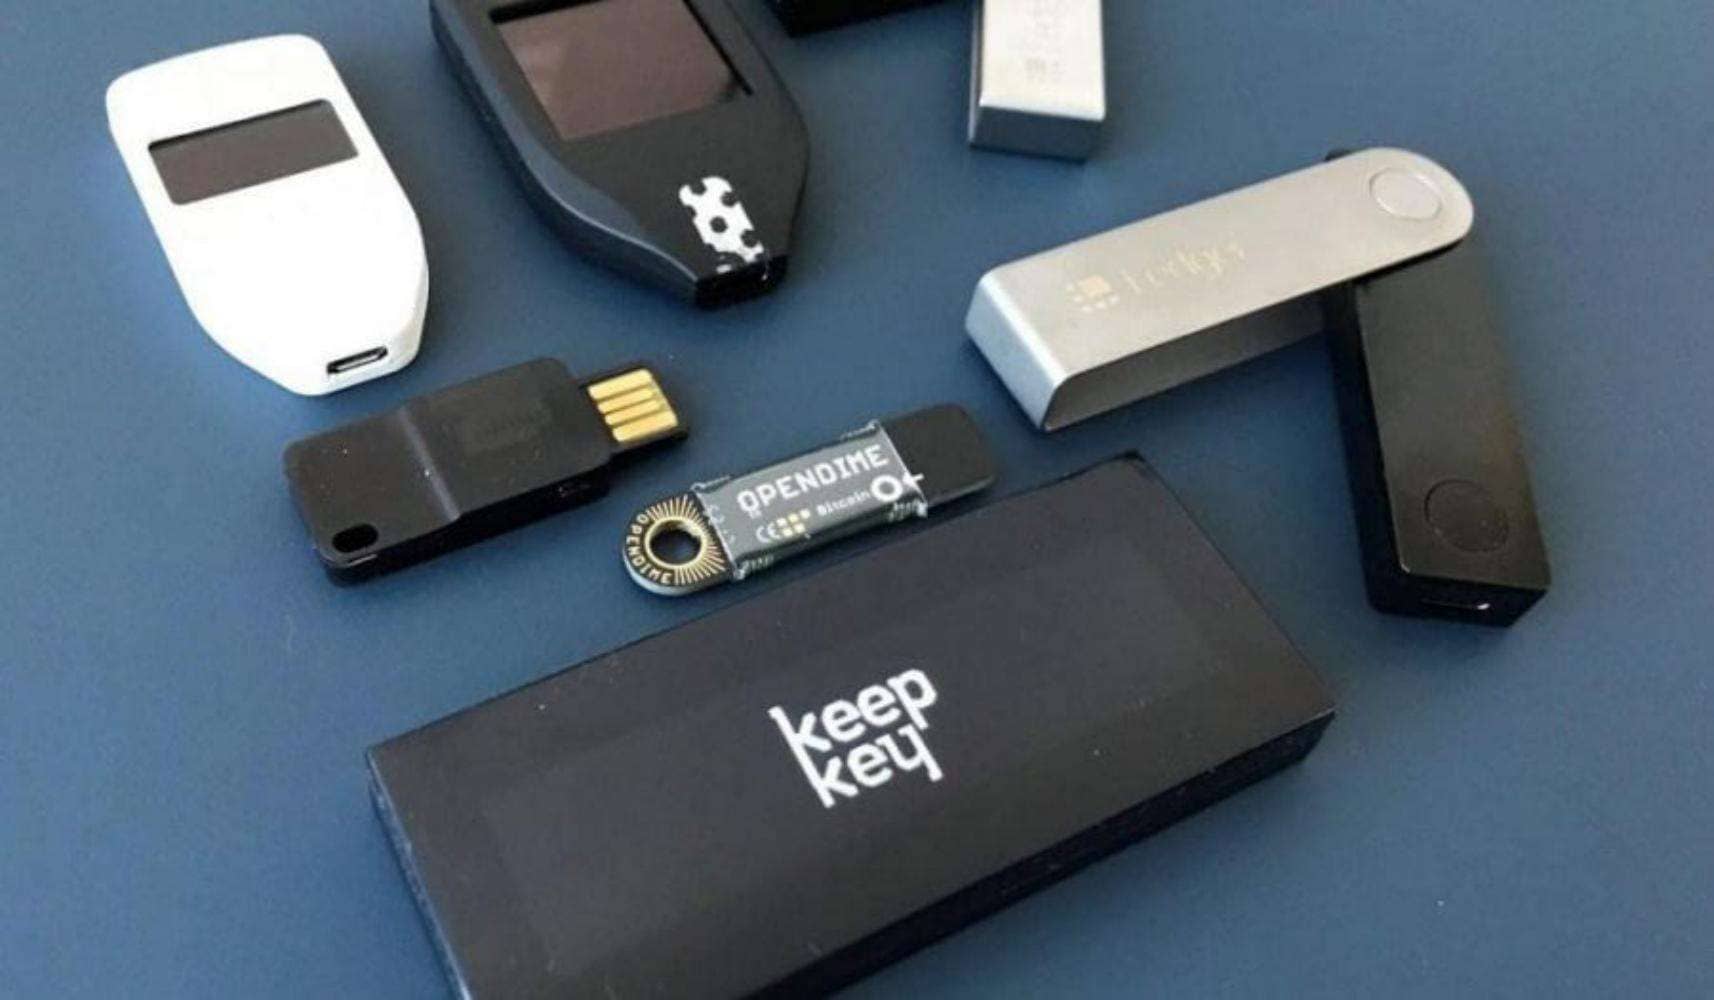 Hardware Cryptocurrency Wallet Overview